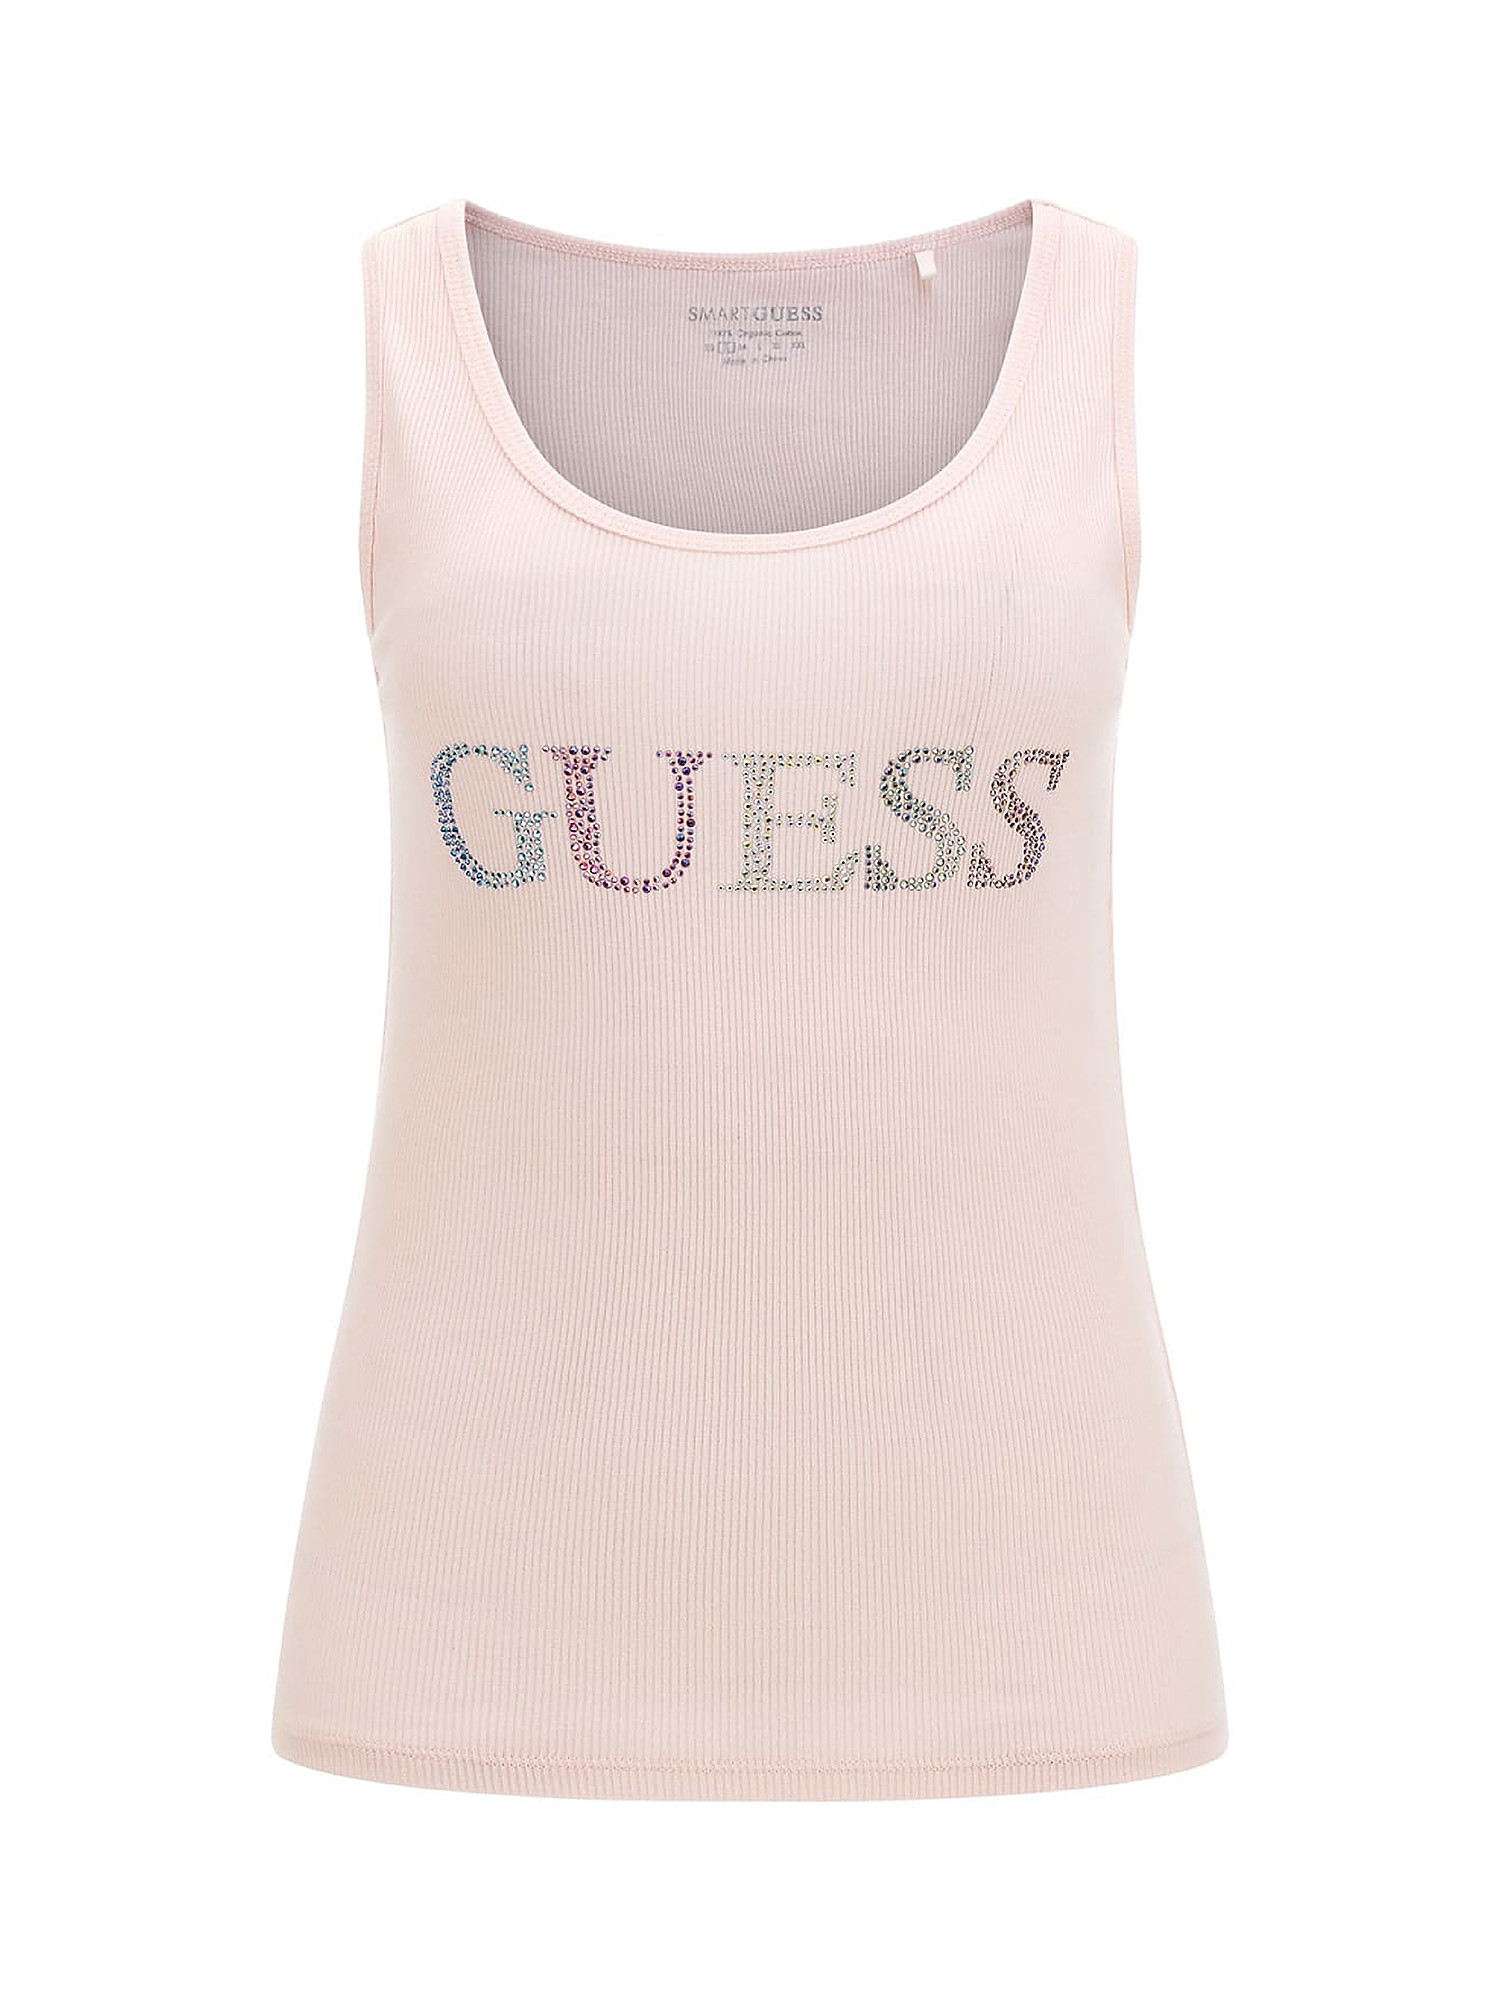 GUESS - Cotton tank top with logo, Pink, large image number 0